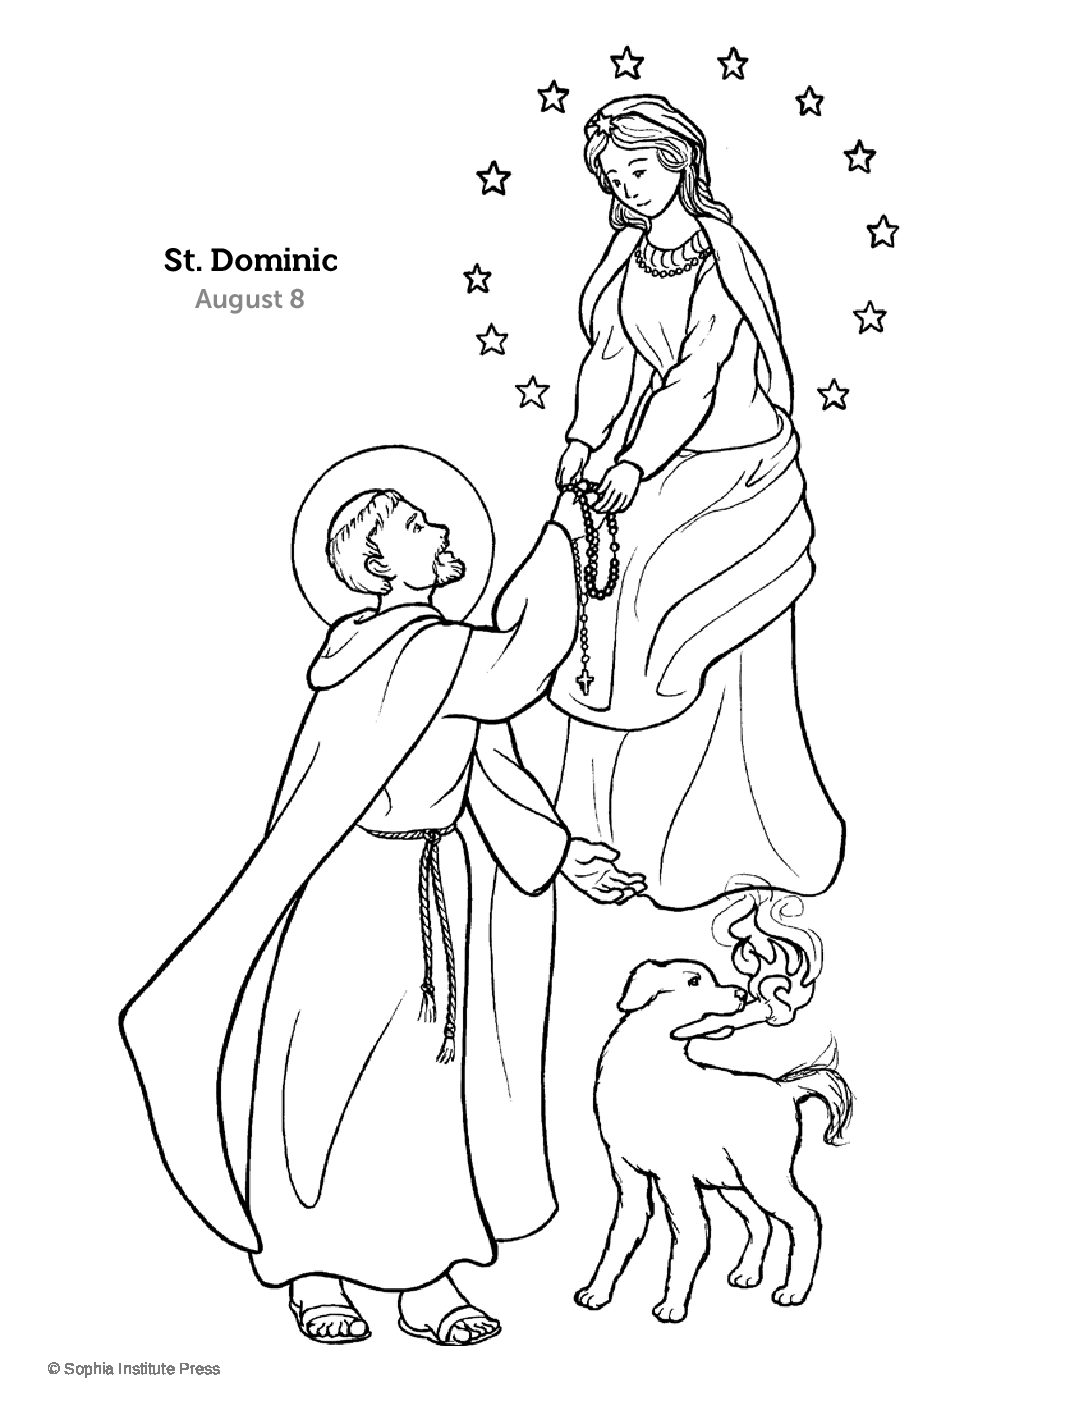 St. Dominic Story and Coloring Page - Sophia Teachers